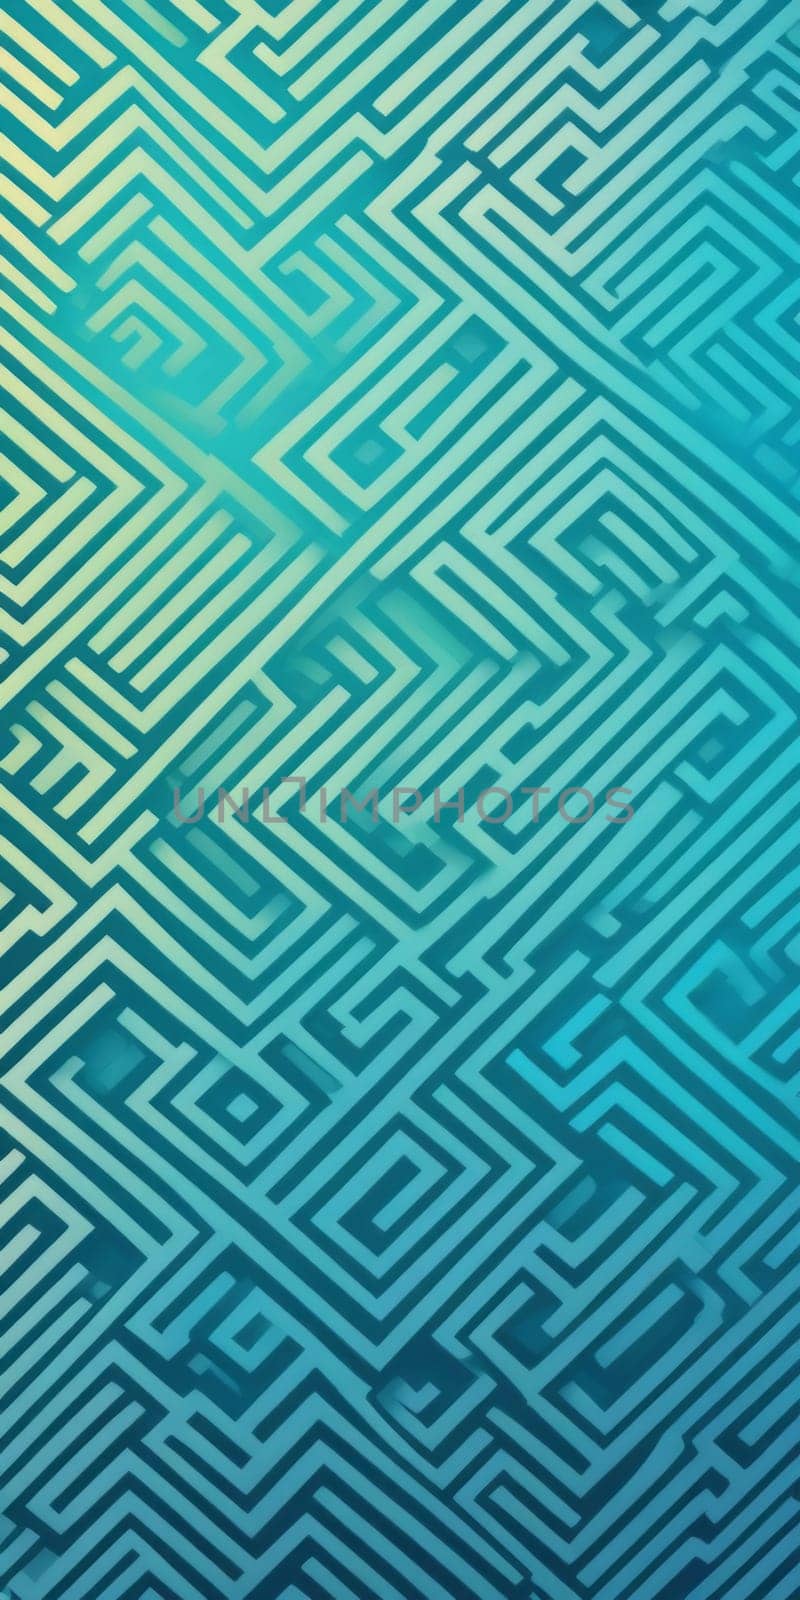 Labyrinth Shapes in Aqua Lightsteelblue by nkotlyar